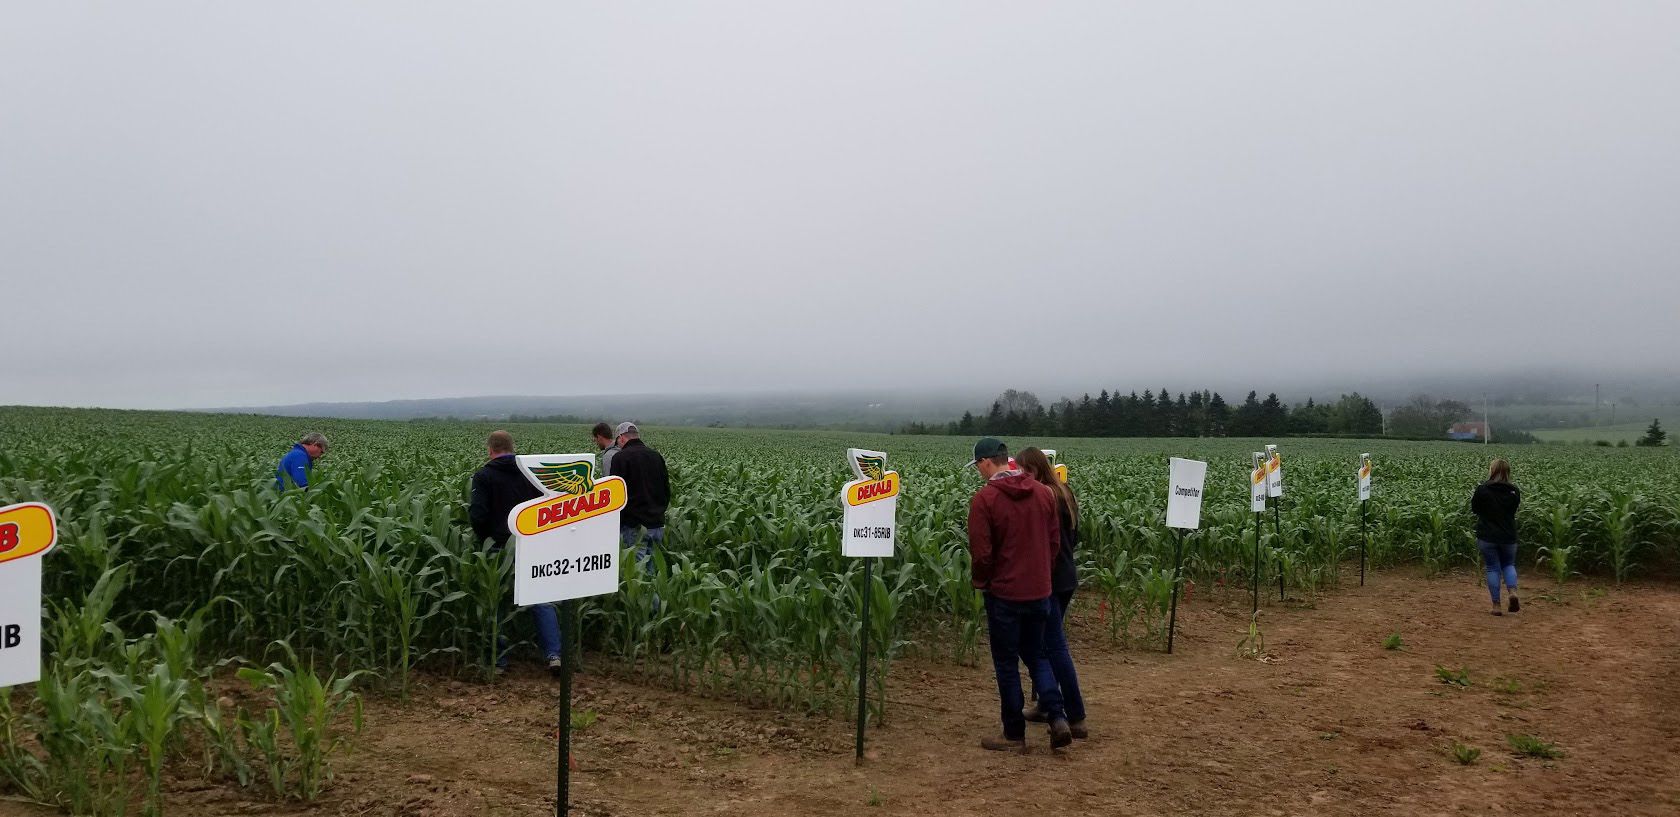 Photo of customers perusing Truro Agromart's crops, Dekalb signs throughout